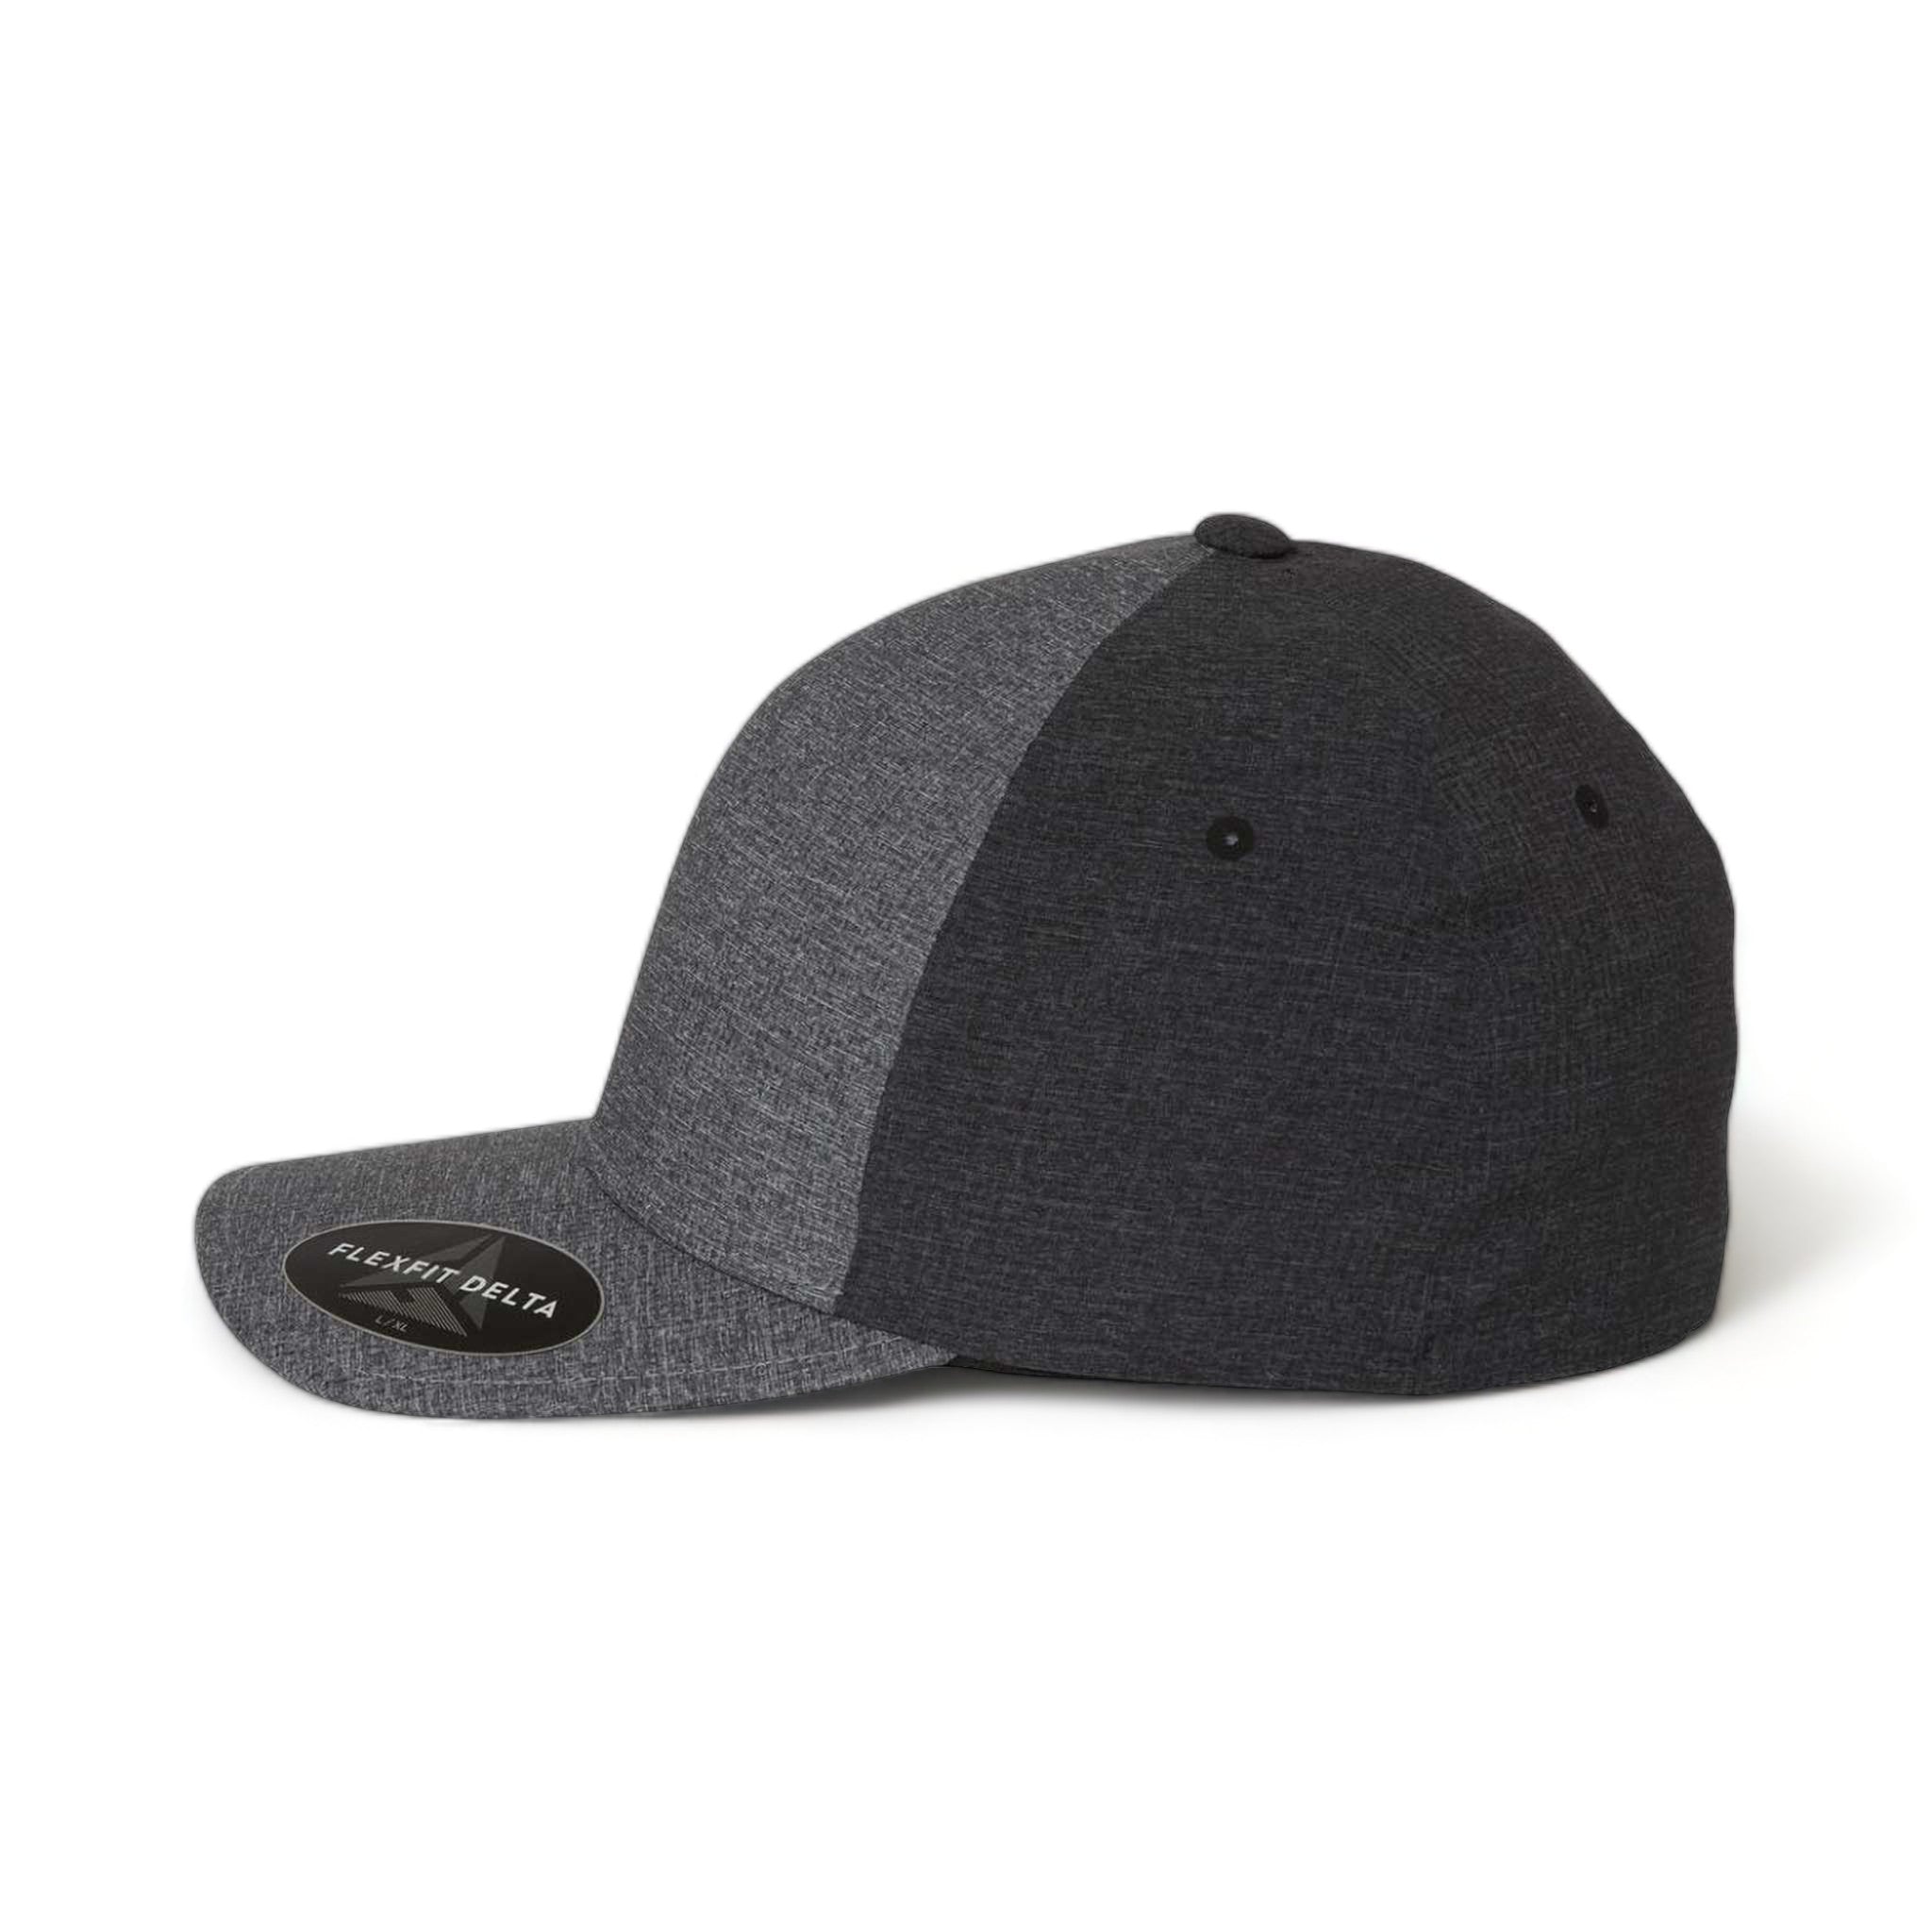 Side view of Flexfit 180 custom hat in mélange blue and mélange charcoal